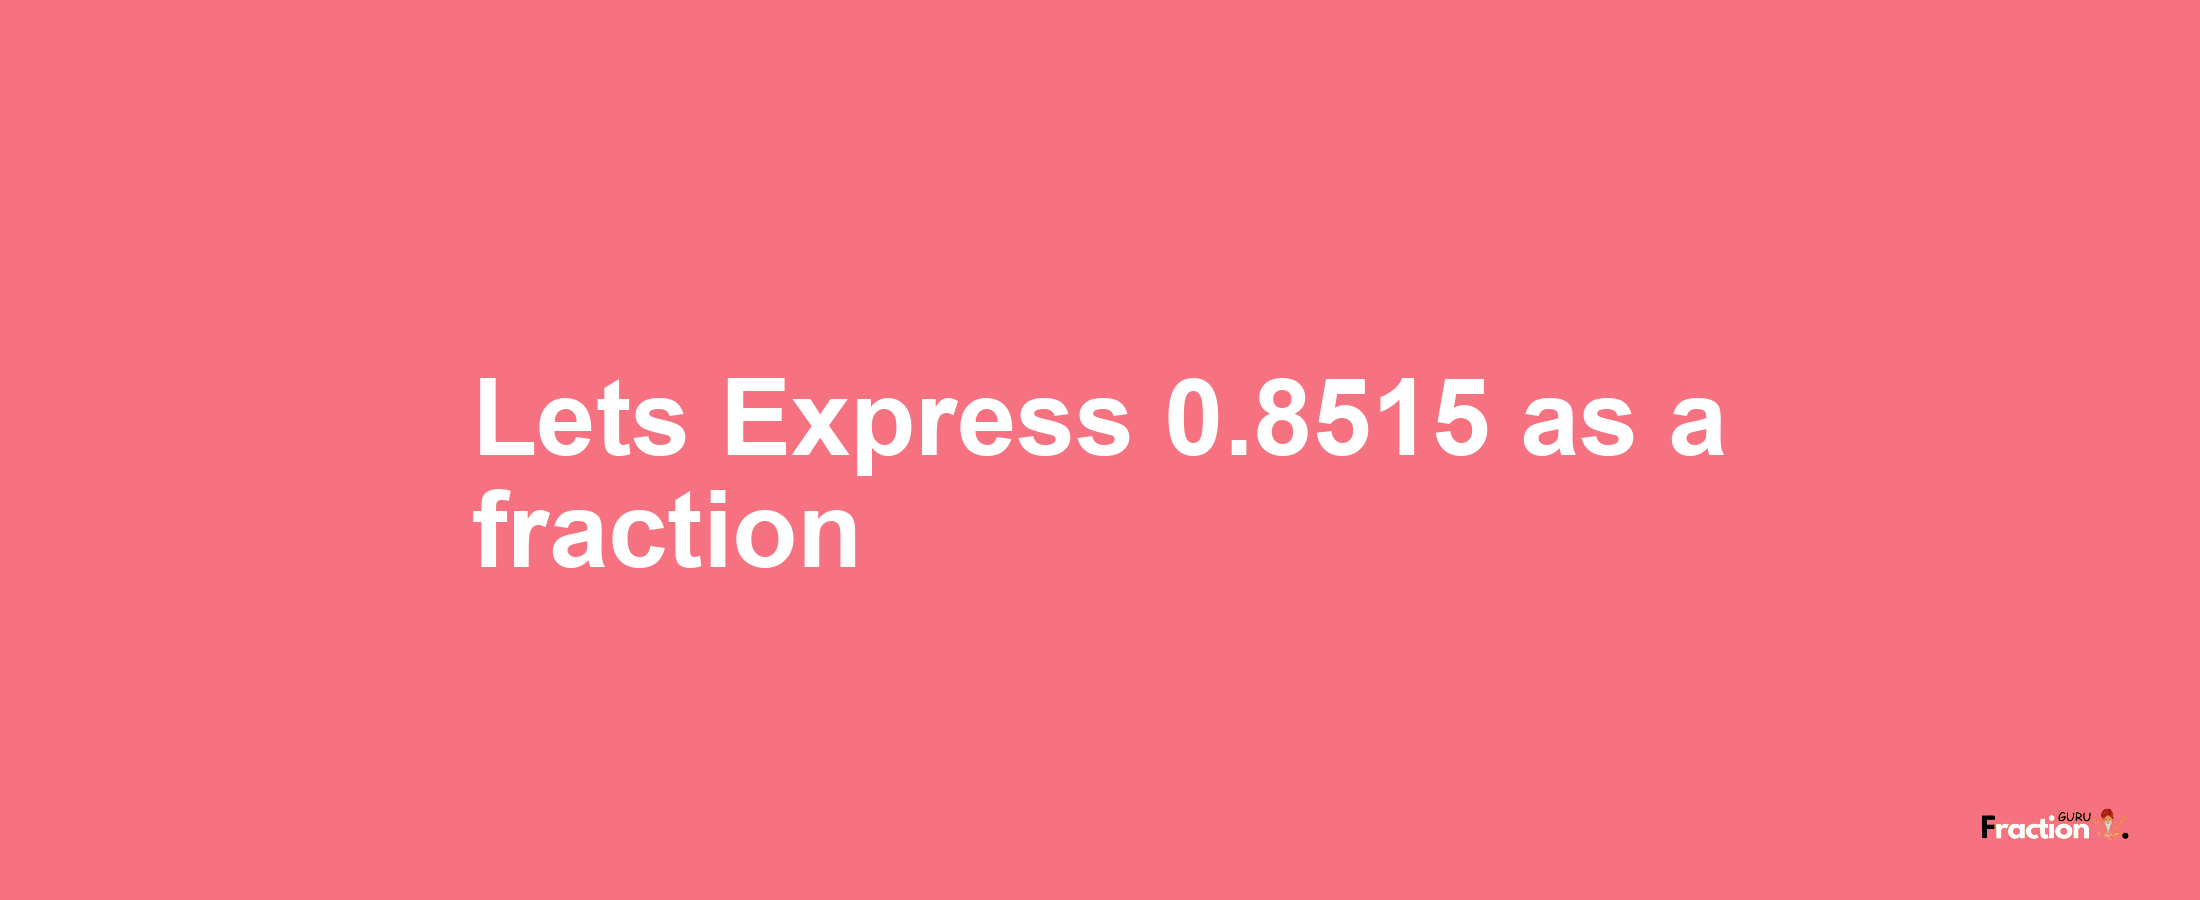 Lets Express 0.8515 as afraction